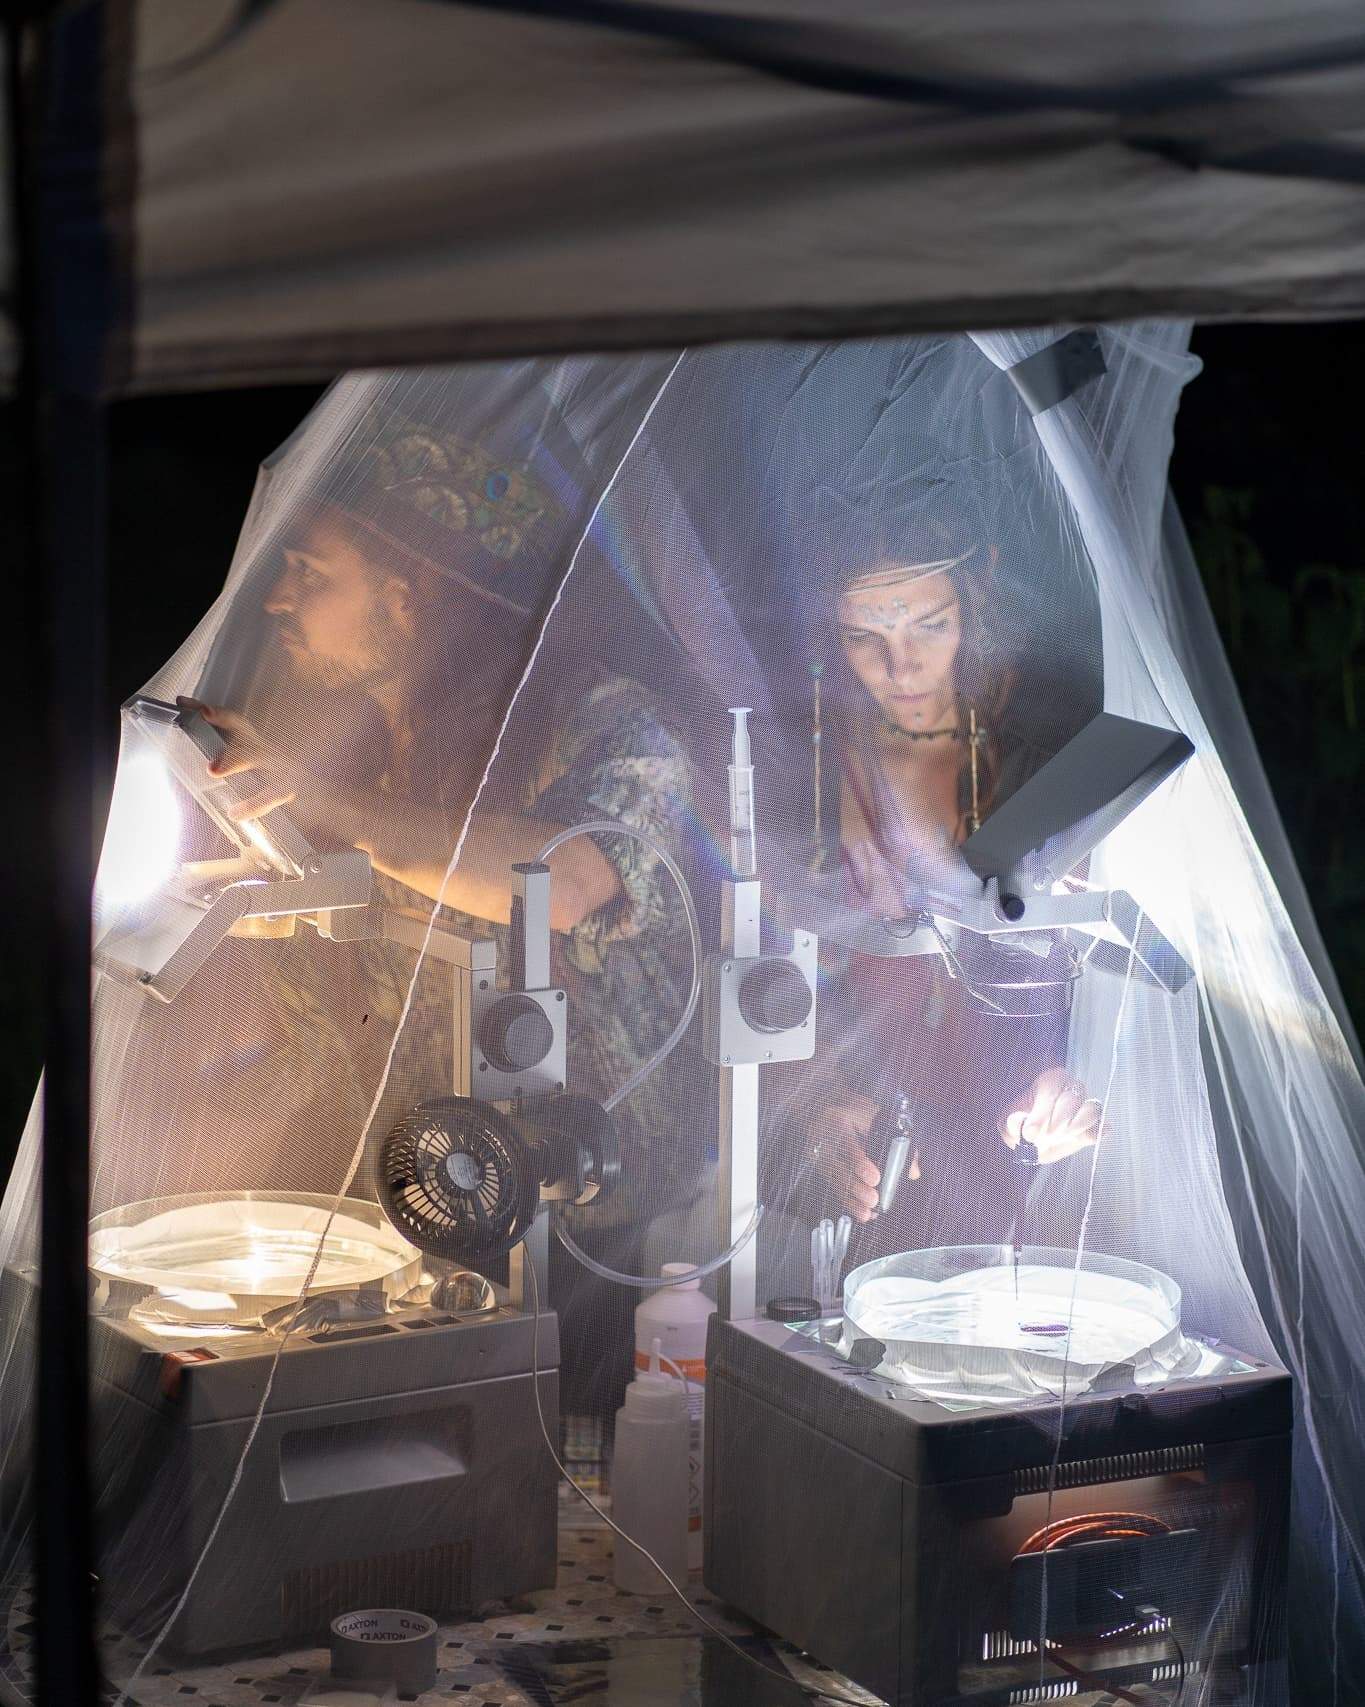 The mosquito net keeps the insects from flying into the plates